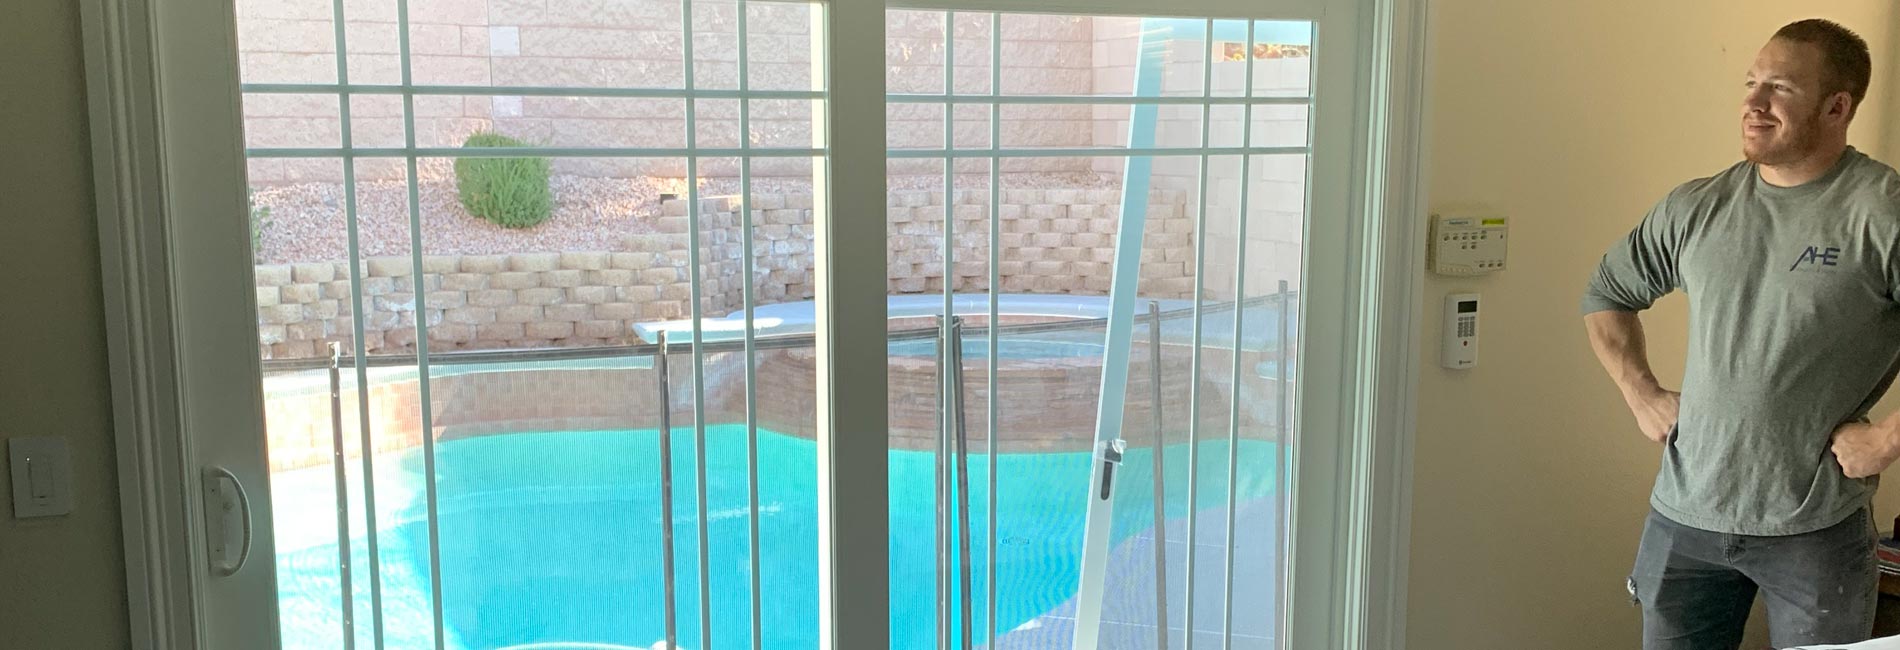 sliding patio door installation in las vegas with patterned floor-to-ceiling french sliding doors